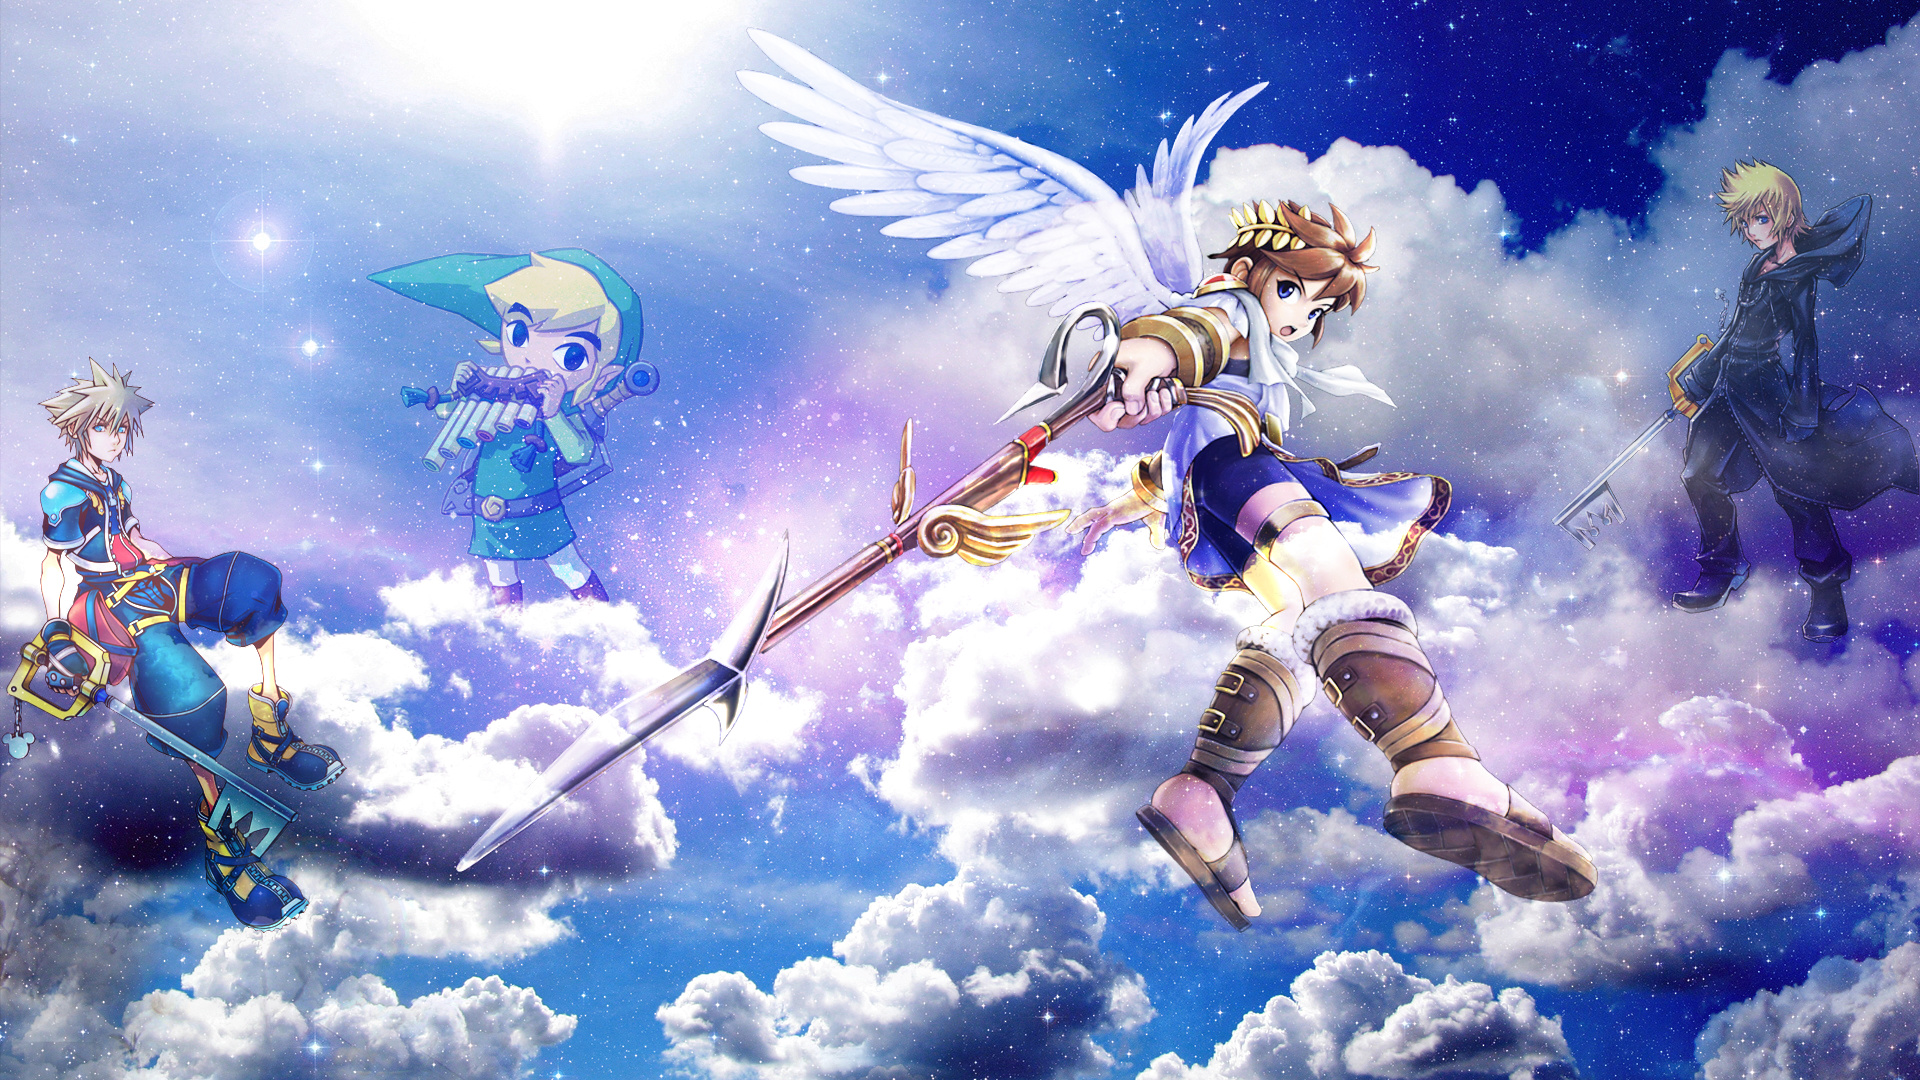 70 Kid Icarus wallpapers, Diverse selection, Fan creations, Graphic inspiration, 1920x1080 Full HD Desktop